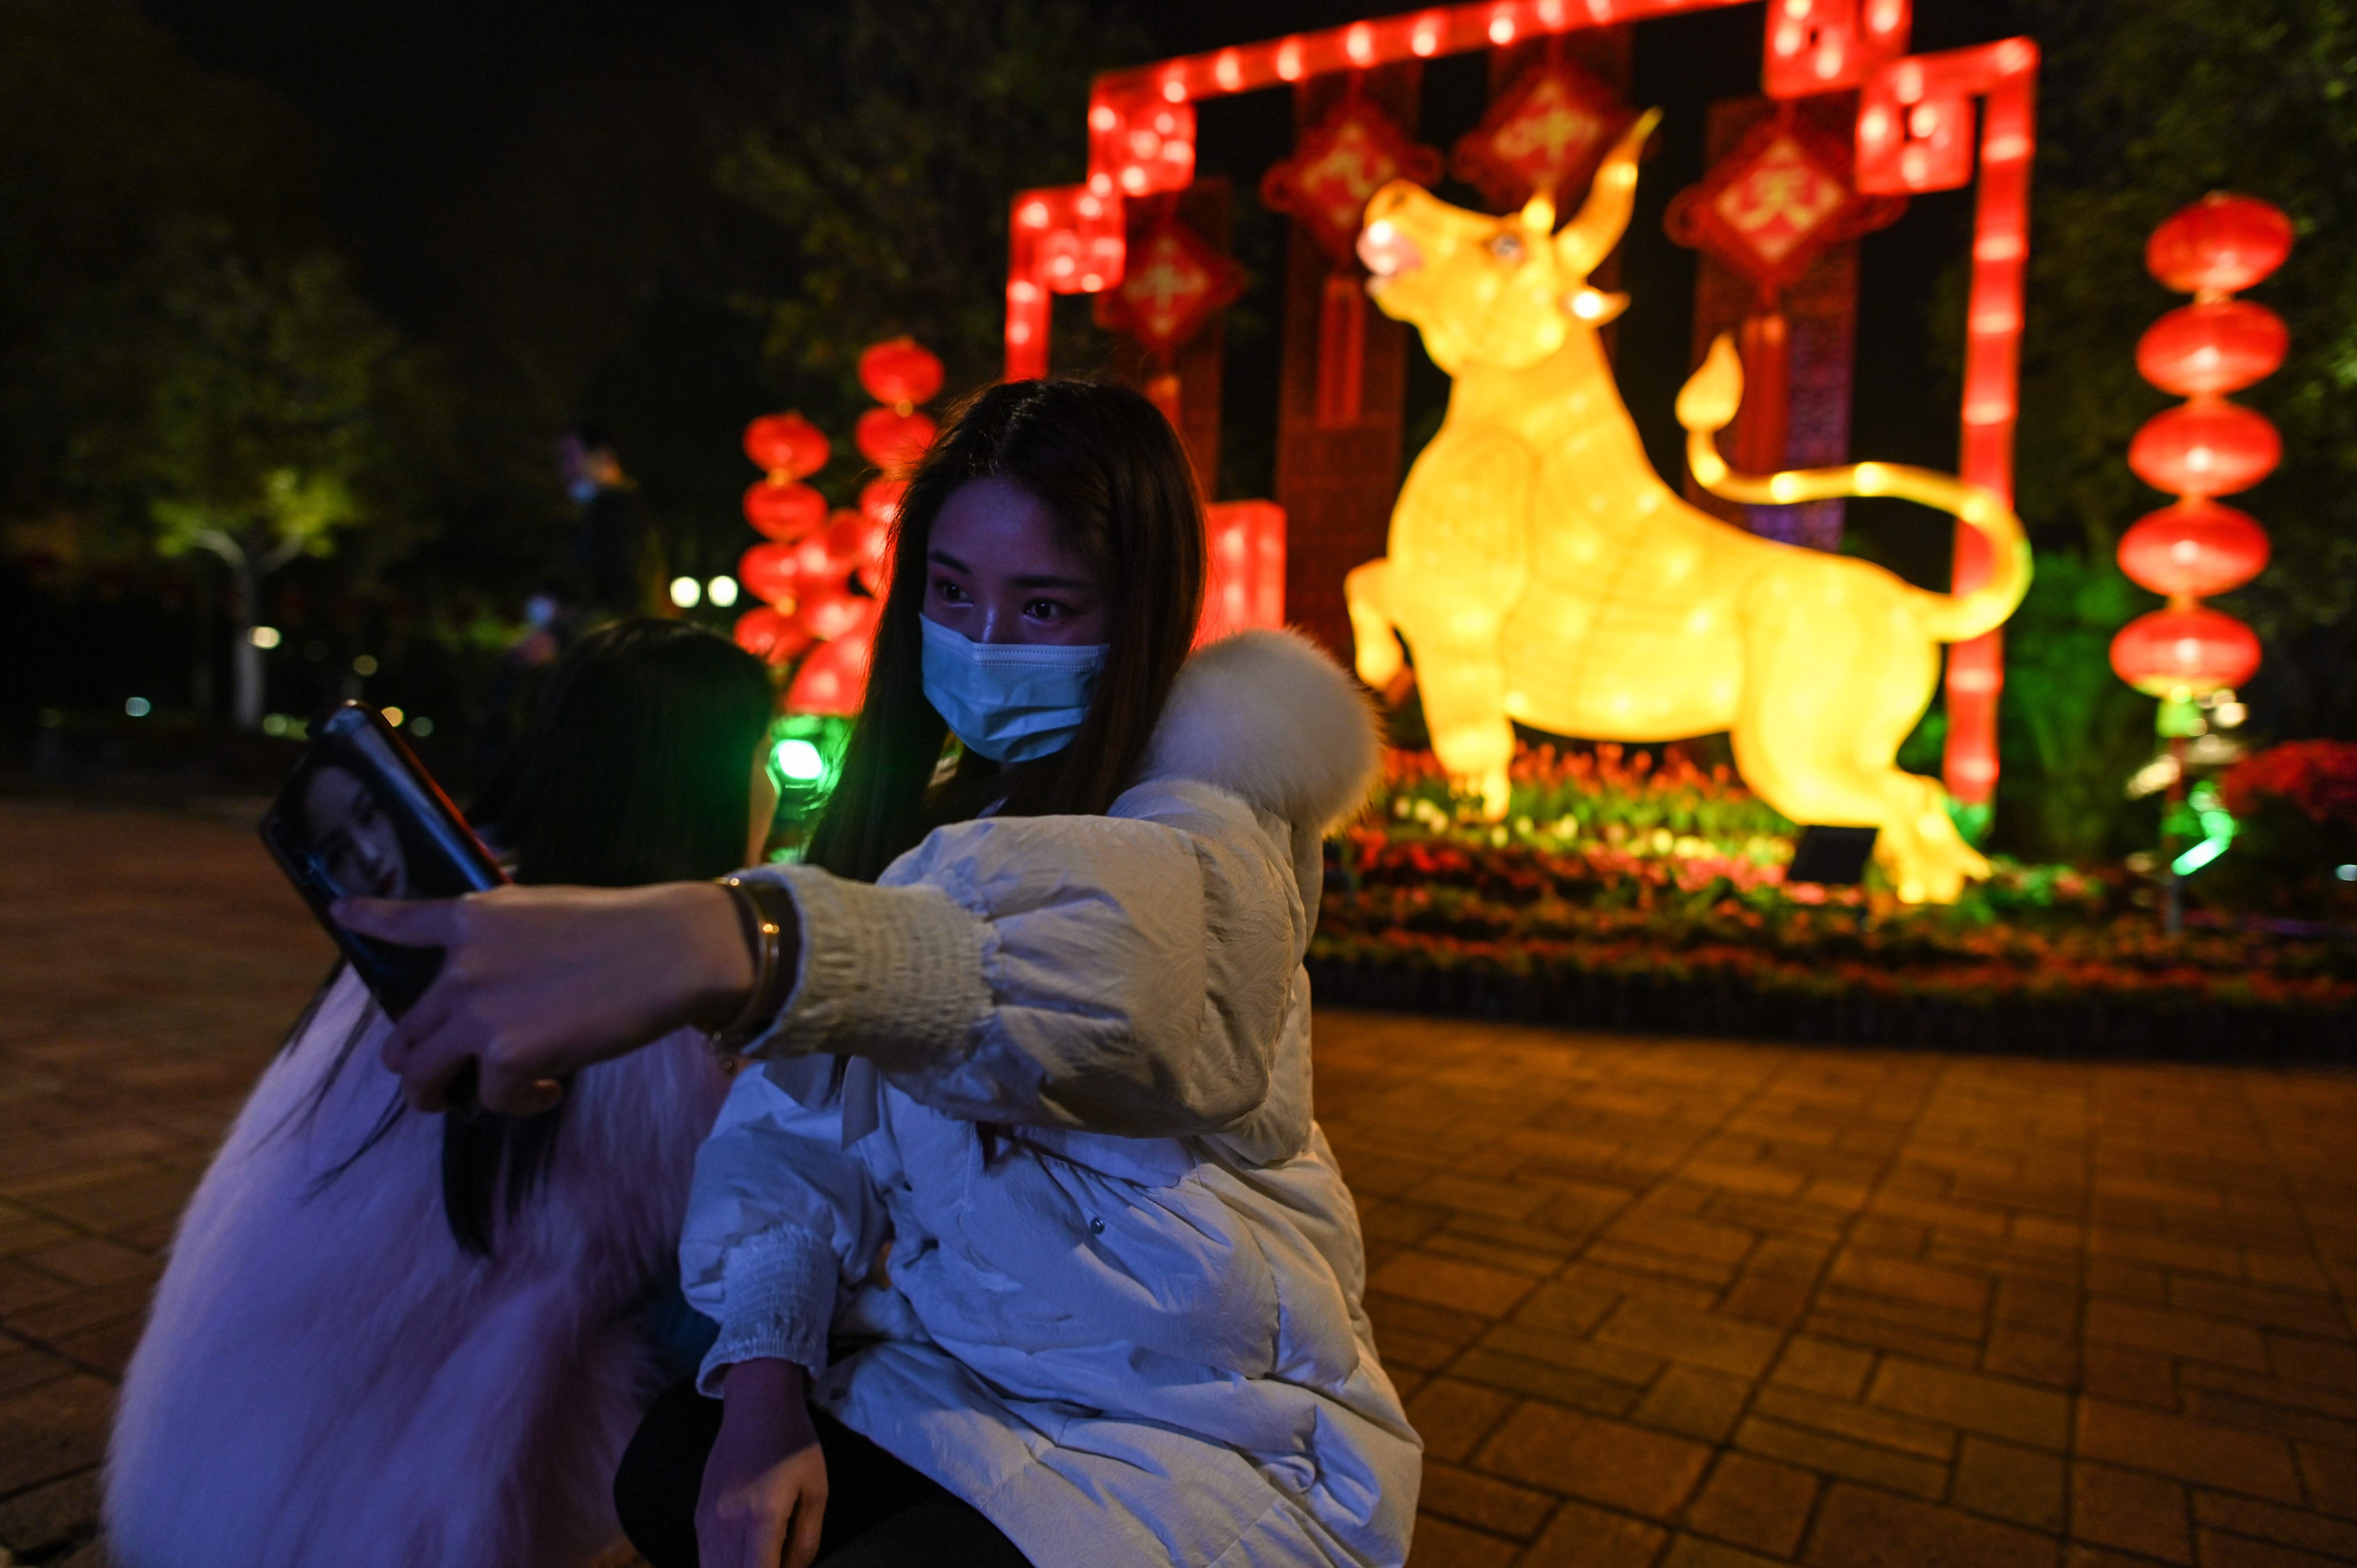 A young woman takes a selfie in Wuhan ahead of the Lunar New Year, which ushers in the Year of the Ox on Thursday